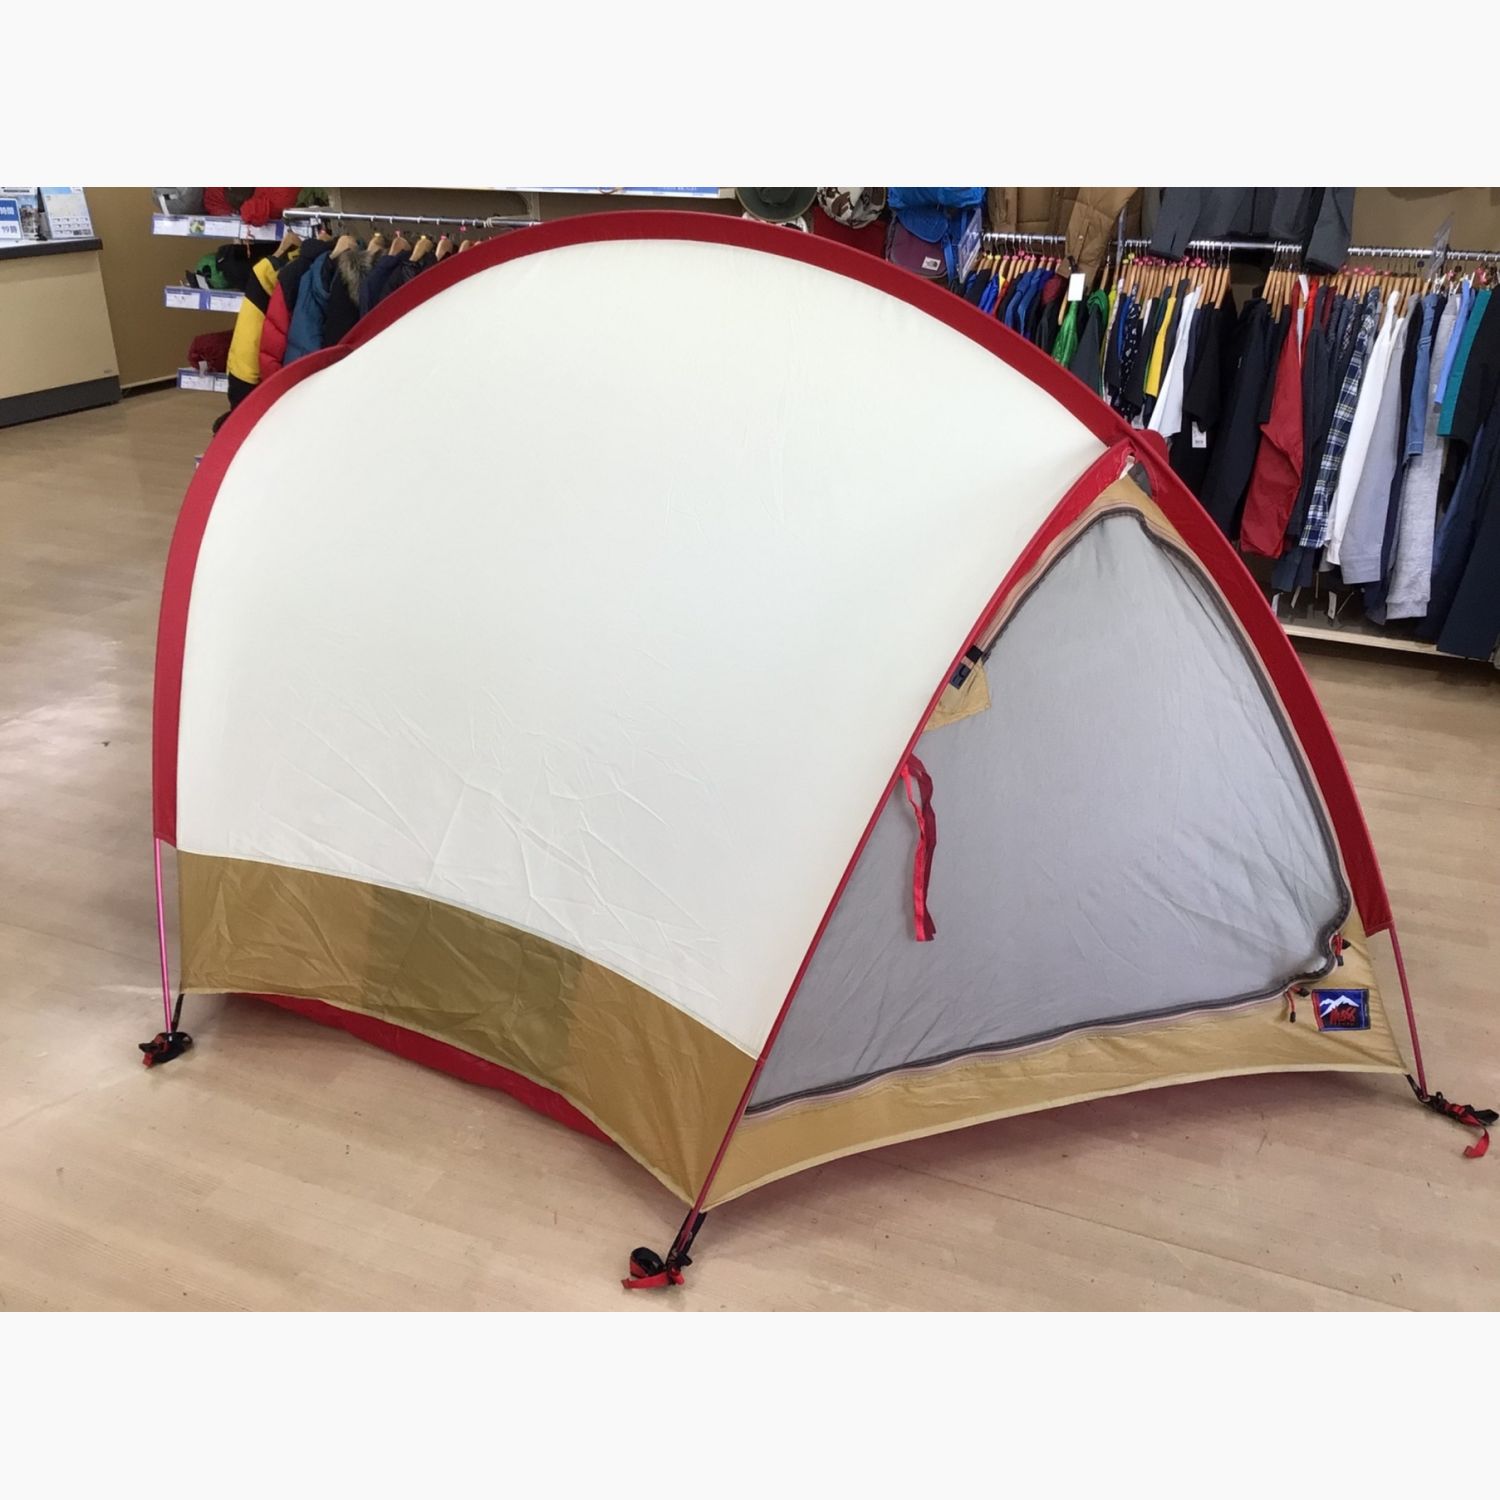 MOSS TENTS KING DOME フットプリント